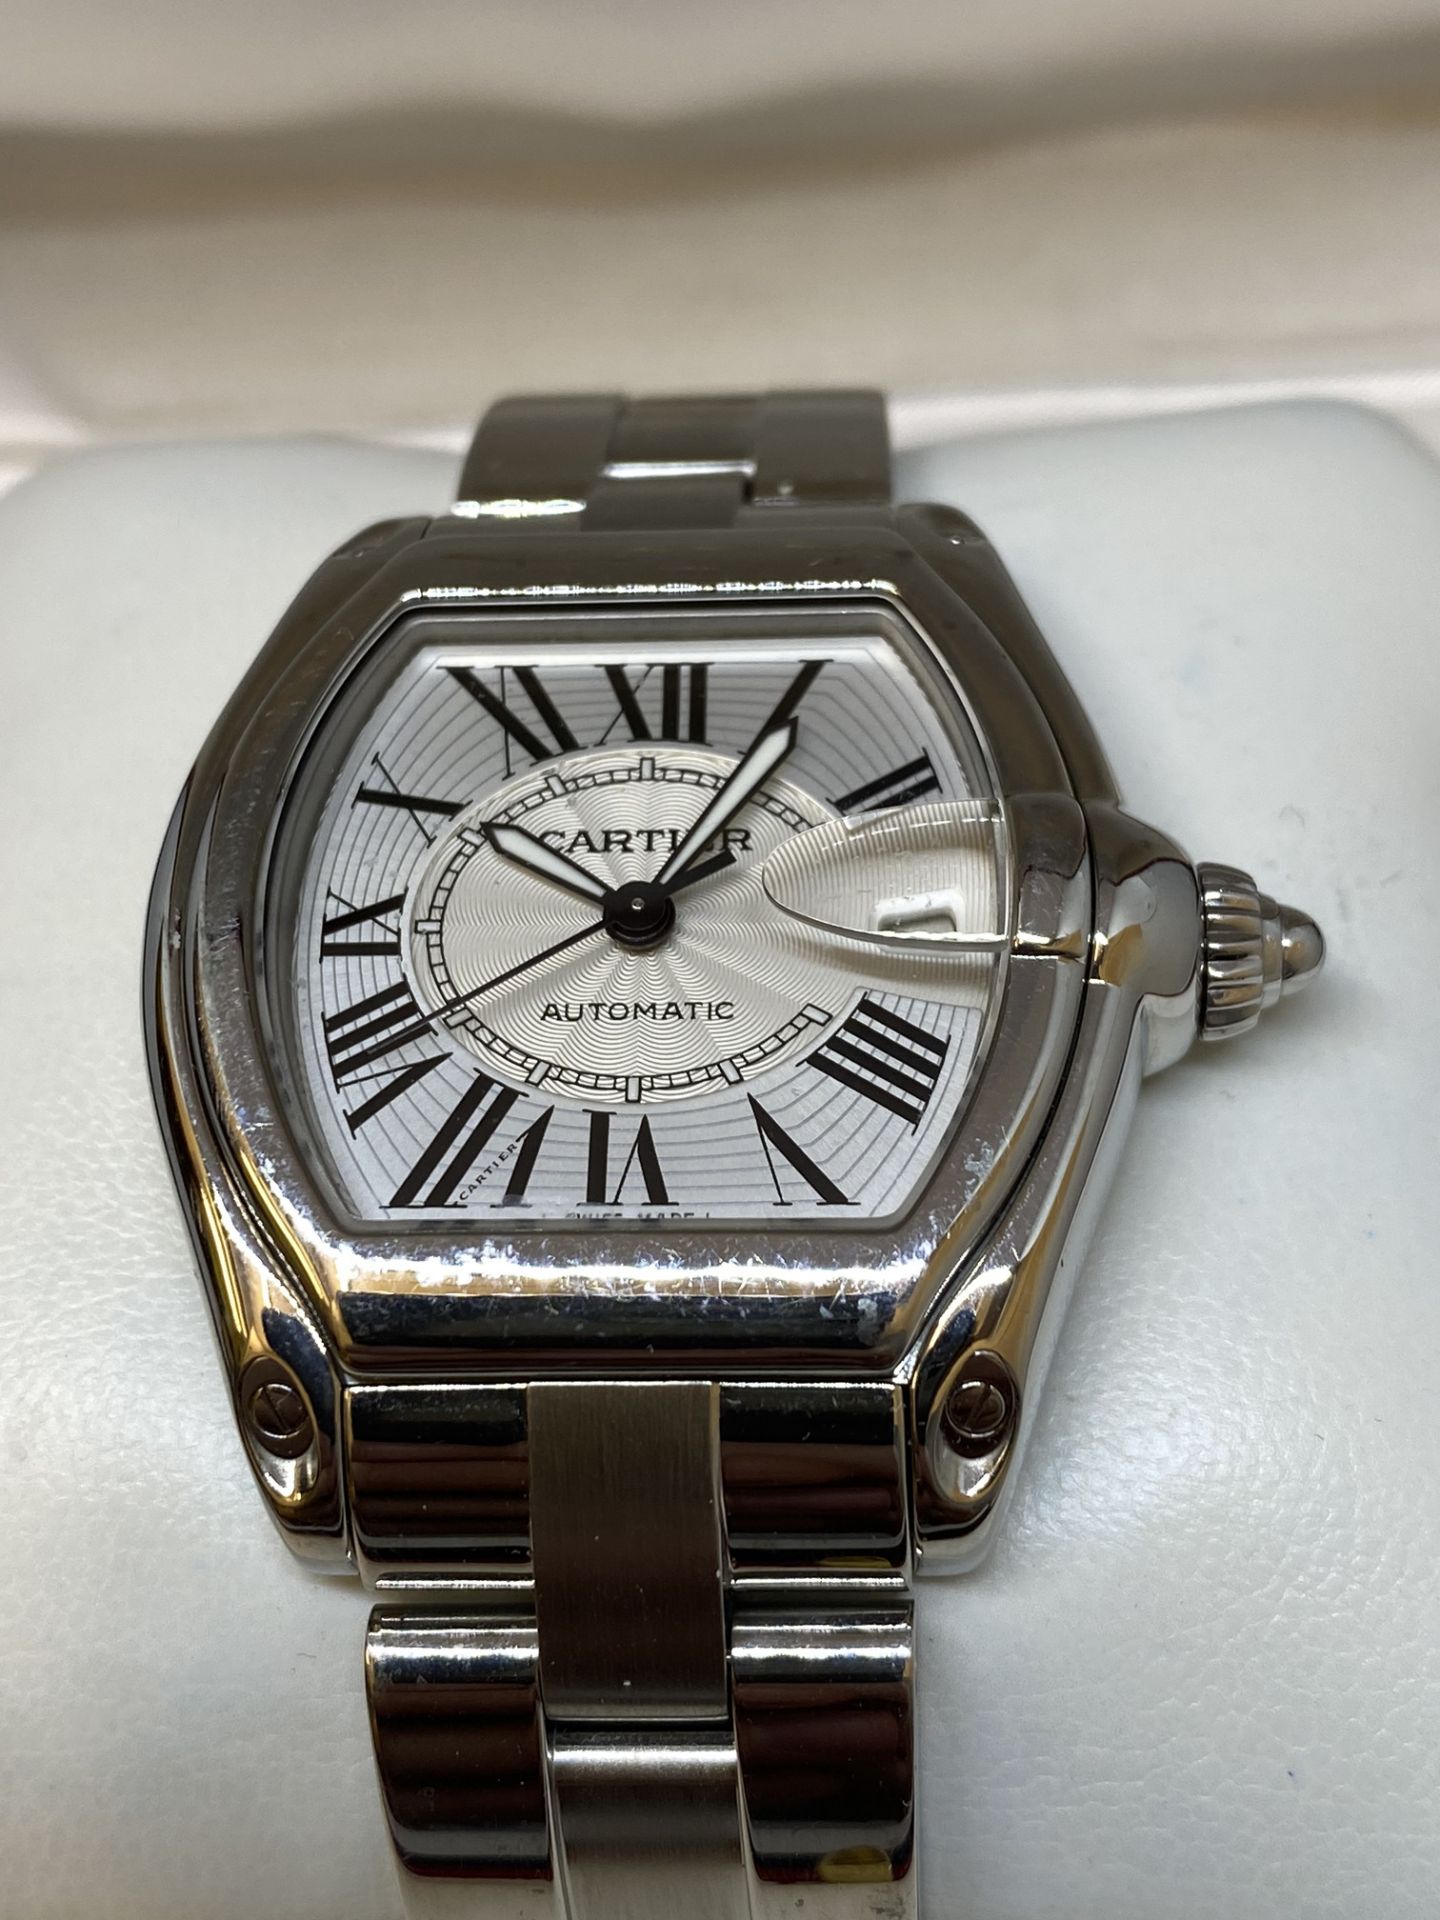 STAINLESS STEEL CARTIER ROADSTER AUTOMATIC WATCH - Image 3 of 11